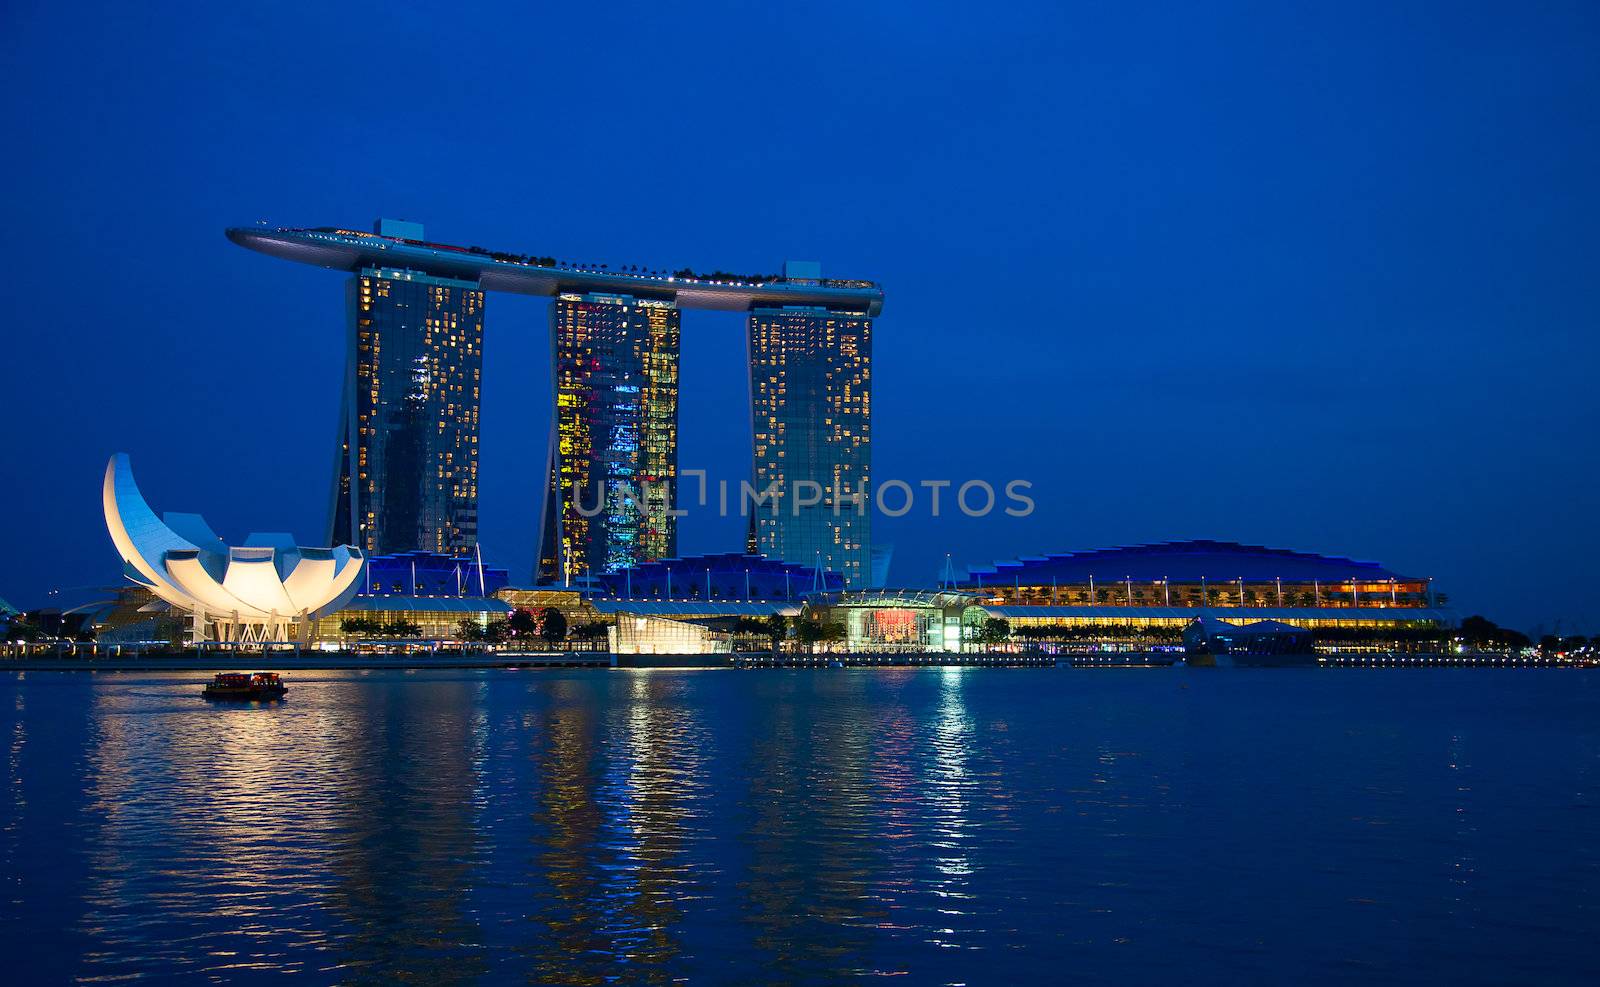 SINGAPORE - FEBRUARY 23: The Marina Bay Sands complex at night on February 23, 2013 in Singapore. Marina Bay Sands is an integrated resort and billed as the world's most expensive standalone casino property.